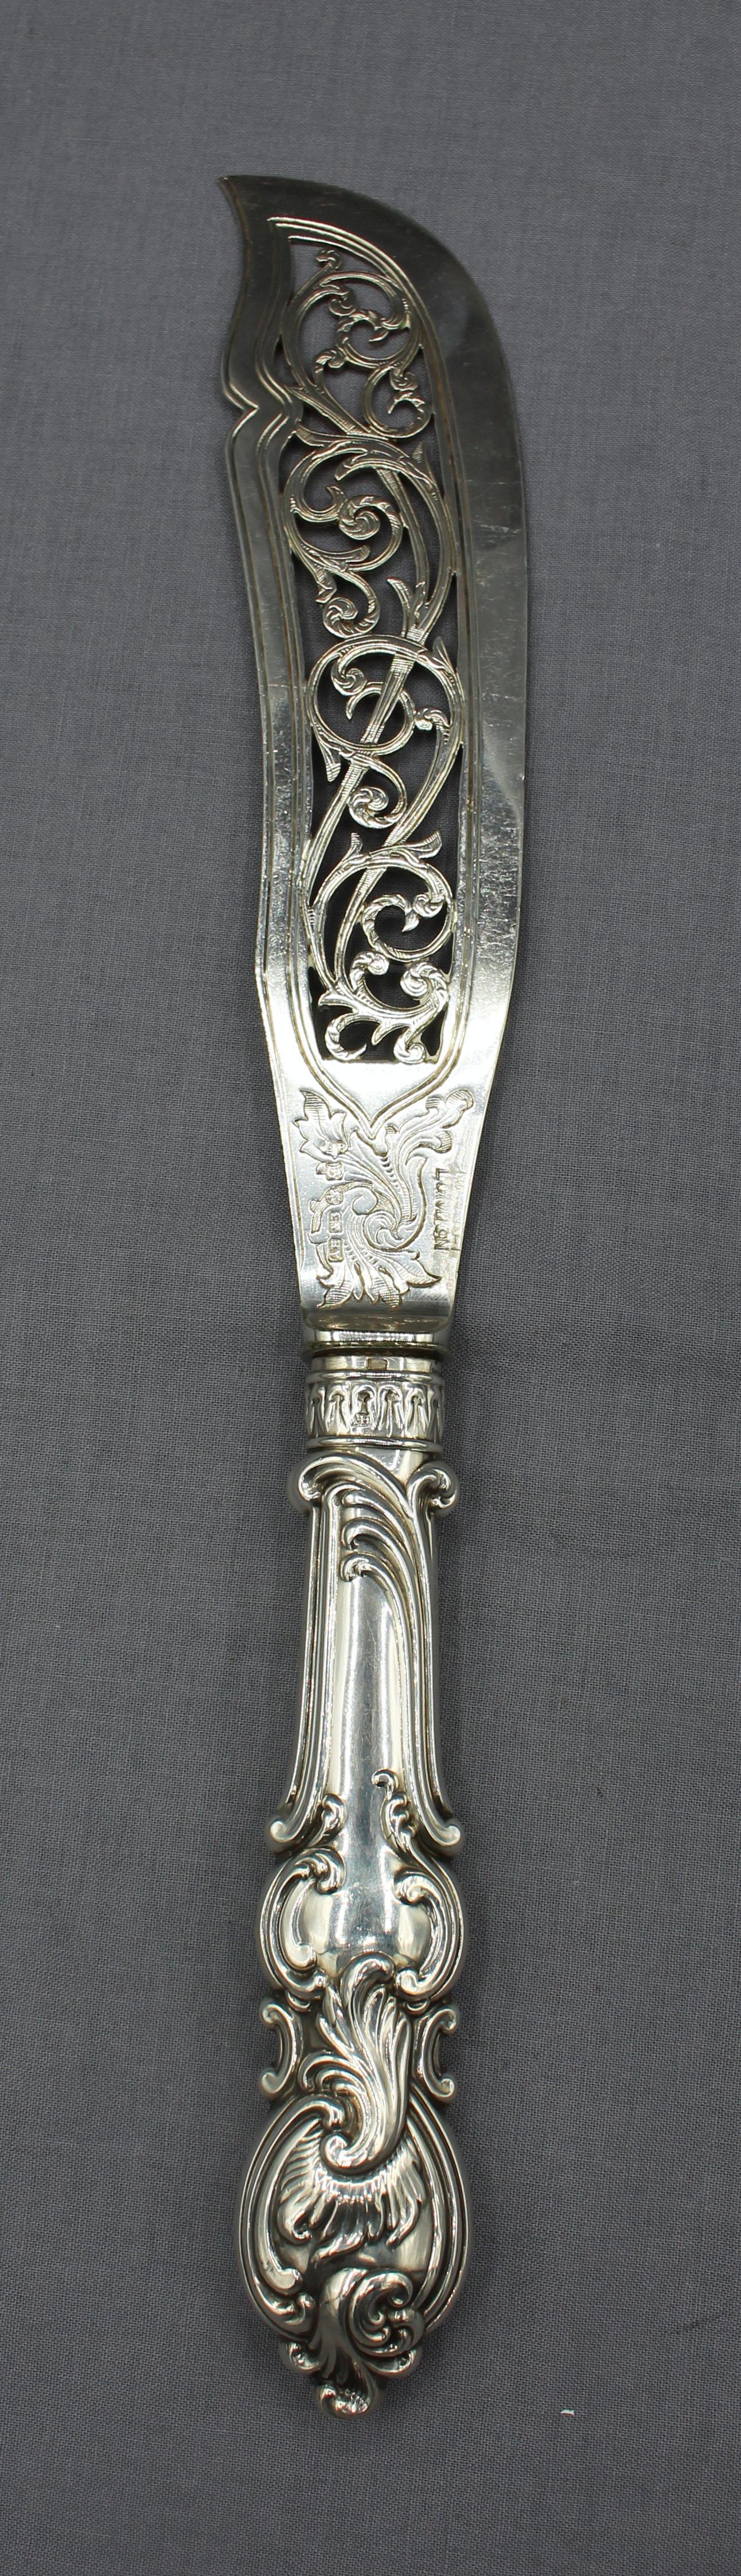 Pair of sterling handled fish servers, England, 1852. The fittings plated with cut work & engraving. A fine pair made by Aaron Hatfield & Sons, Birmingham, England.
Knife: 12.75